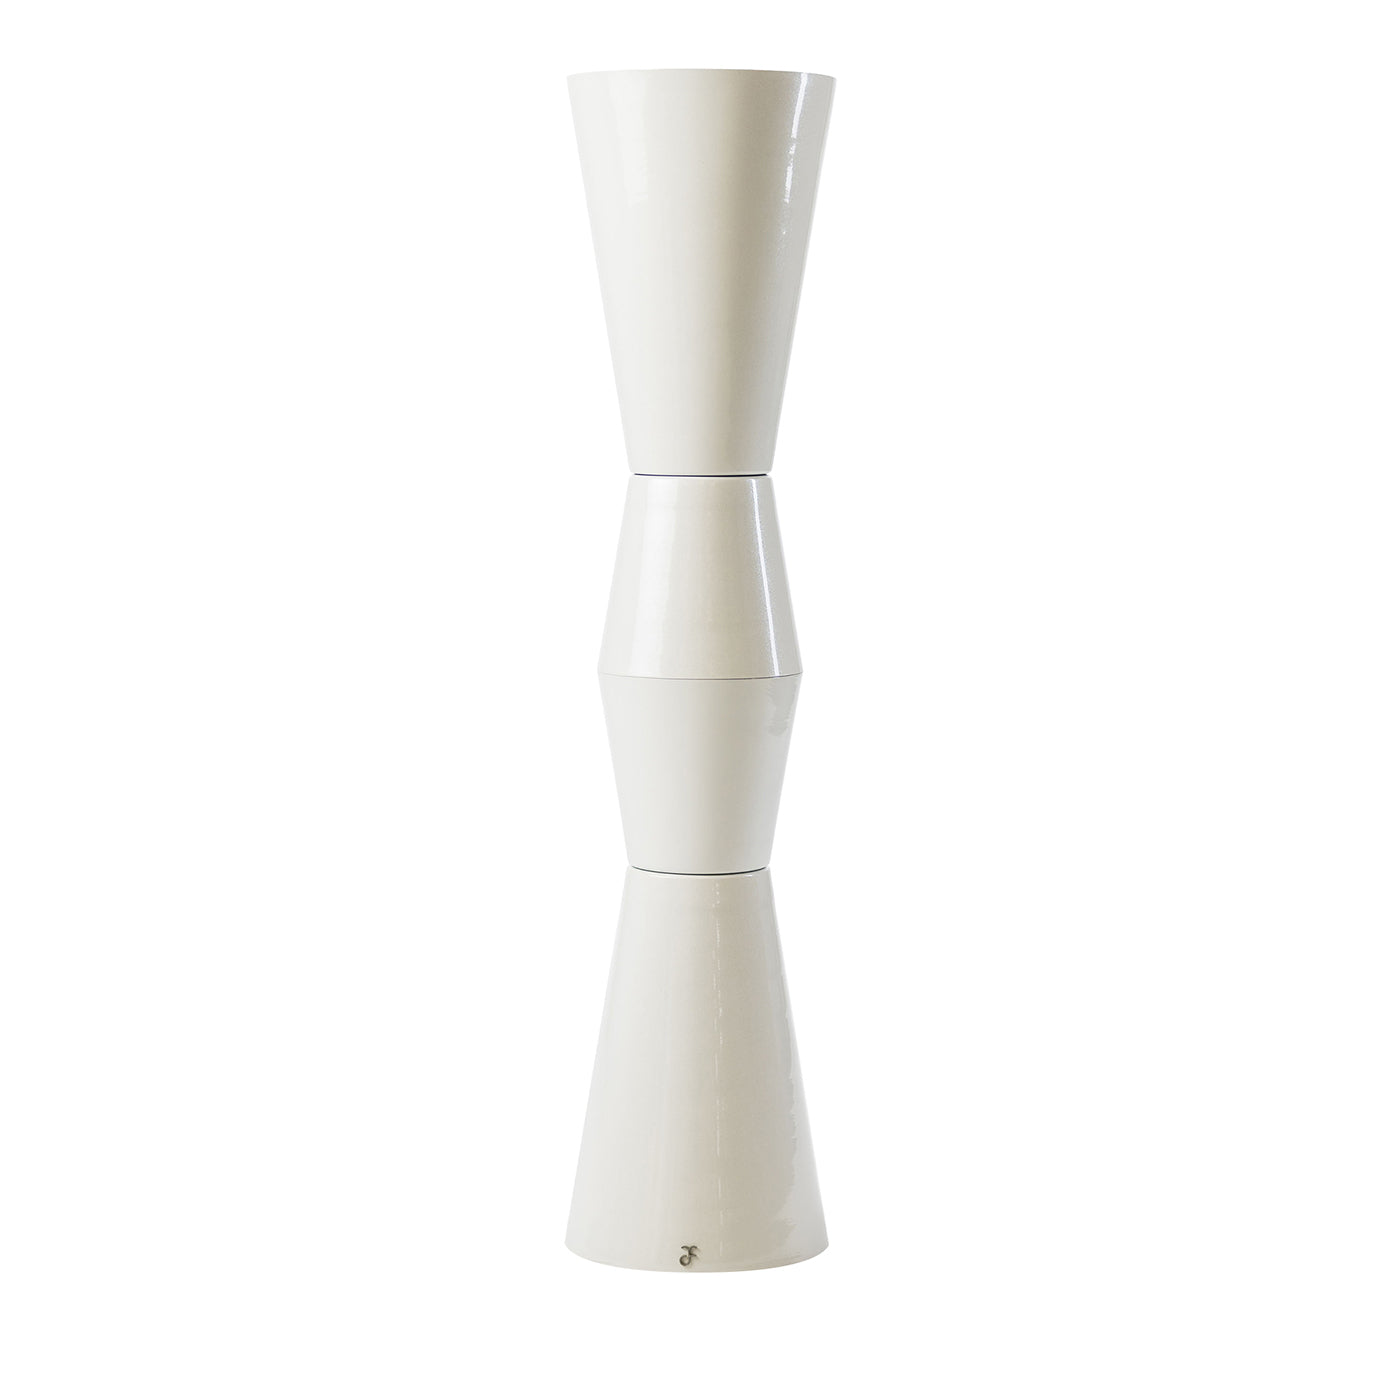 Ulus 90 White Lamp by Marco Piva - Main view